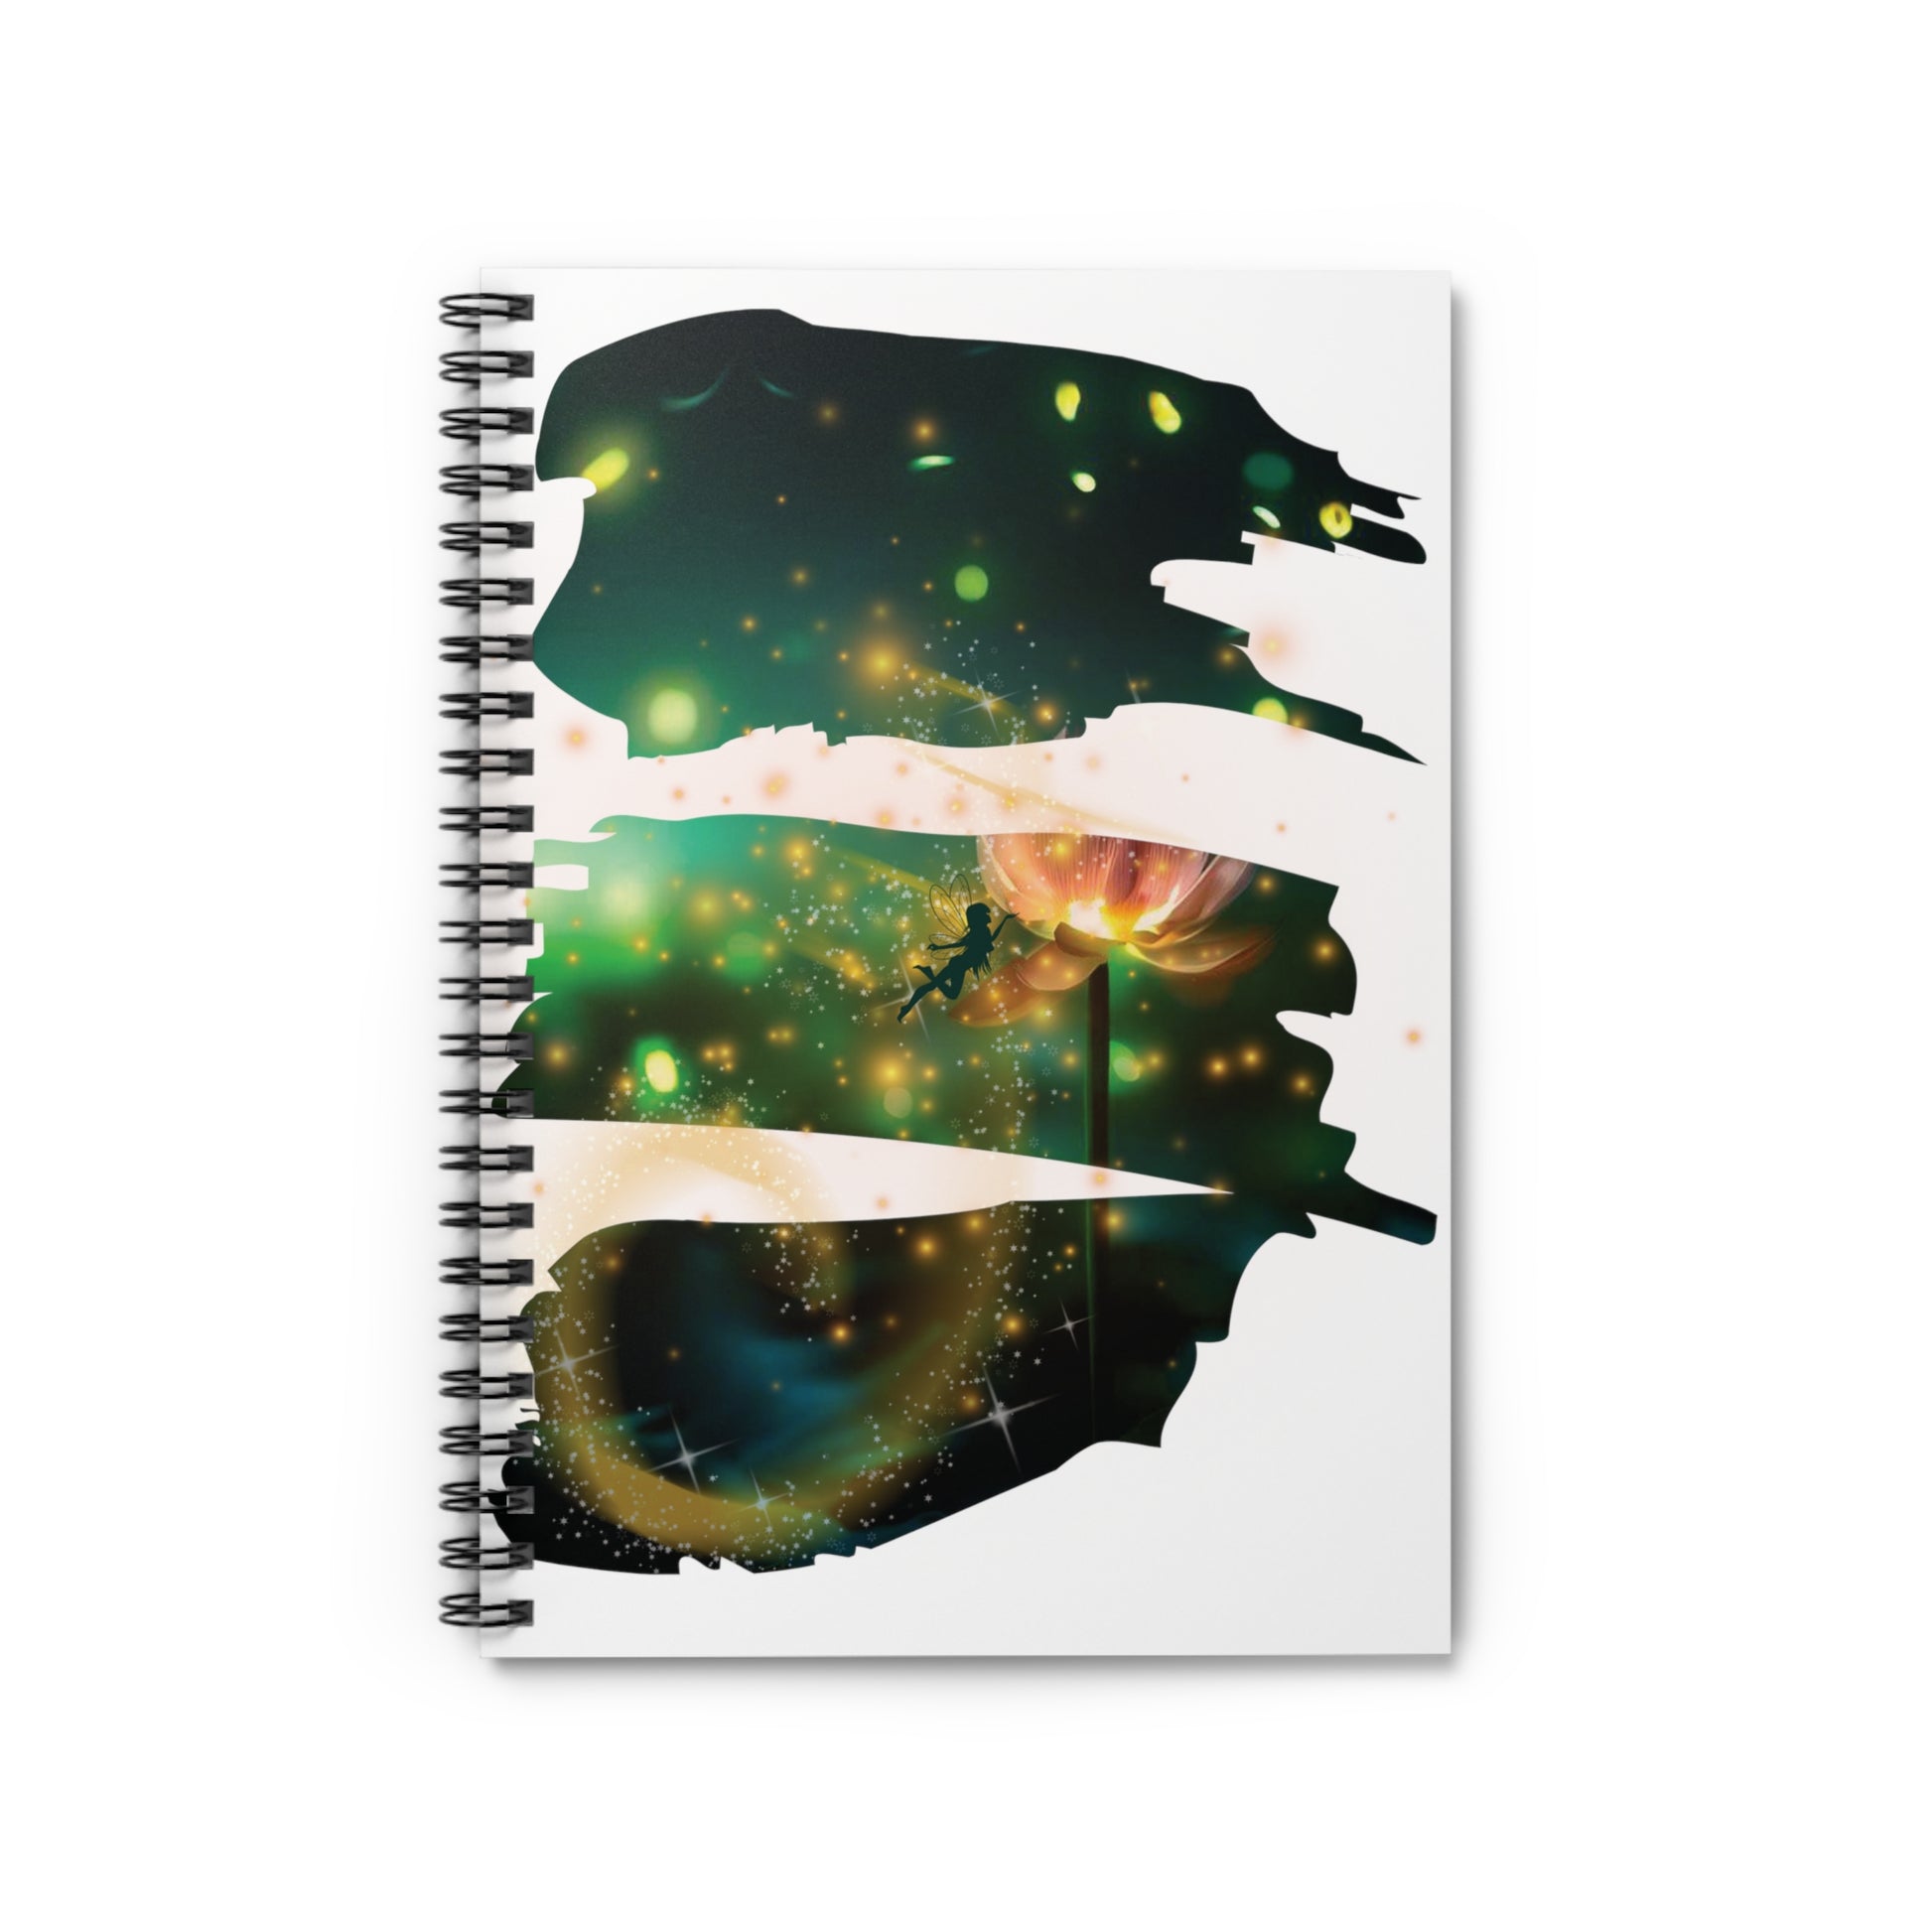 Pixie Dust: Spiral Notebook - Log Books - Journals - Diaries - and More Custom Printed by TheGlassyLass